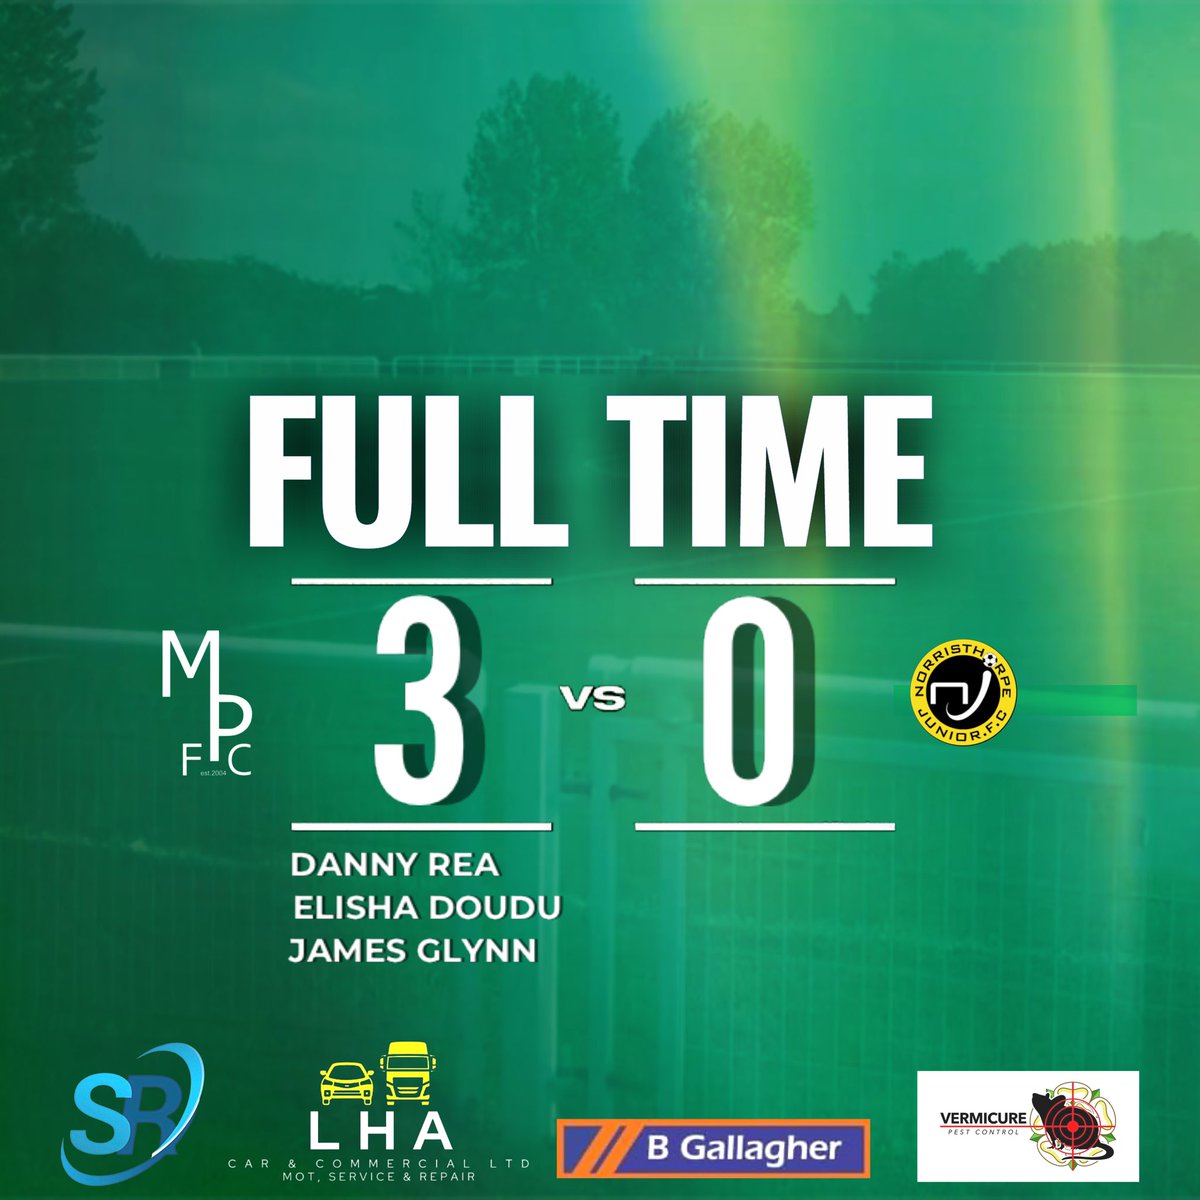 Middleton park put in a pulsating performance against a good strong @NorristhorpeFC1 side. We enjoy the battle as always, good luck till next time.💚